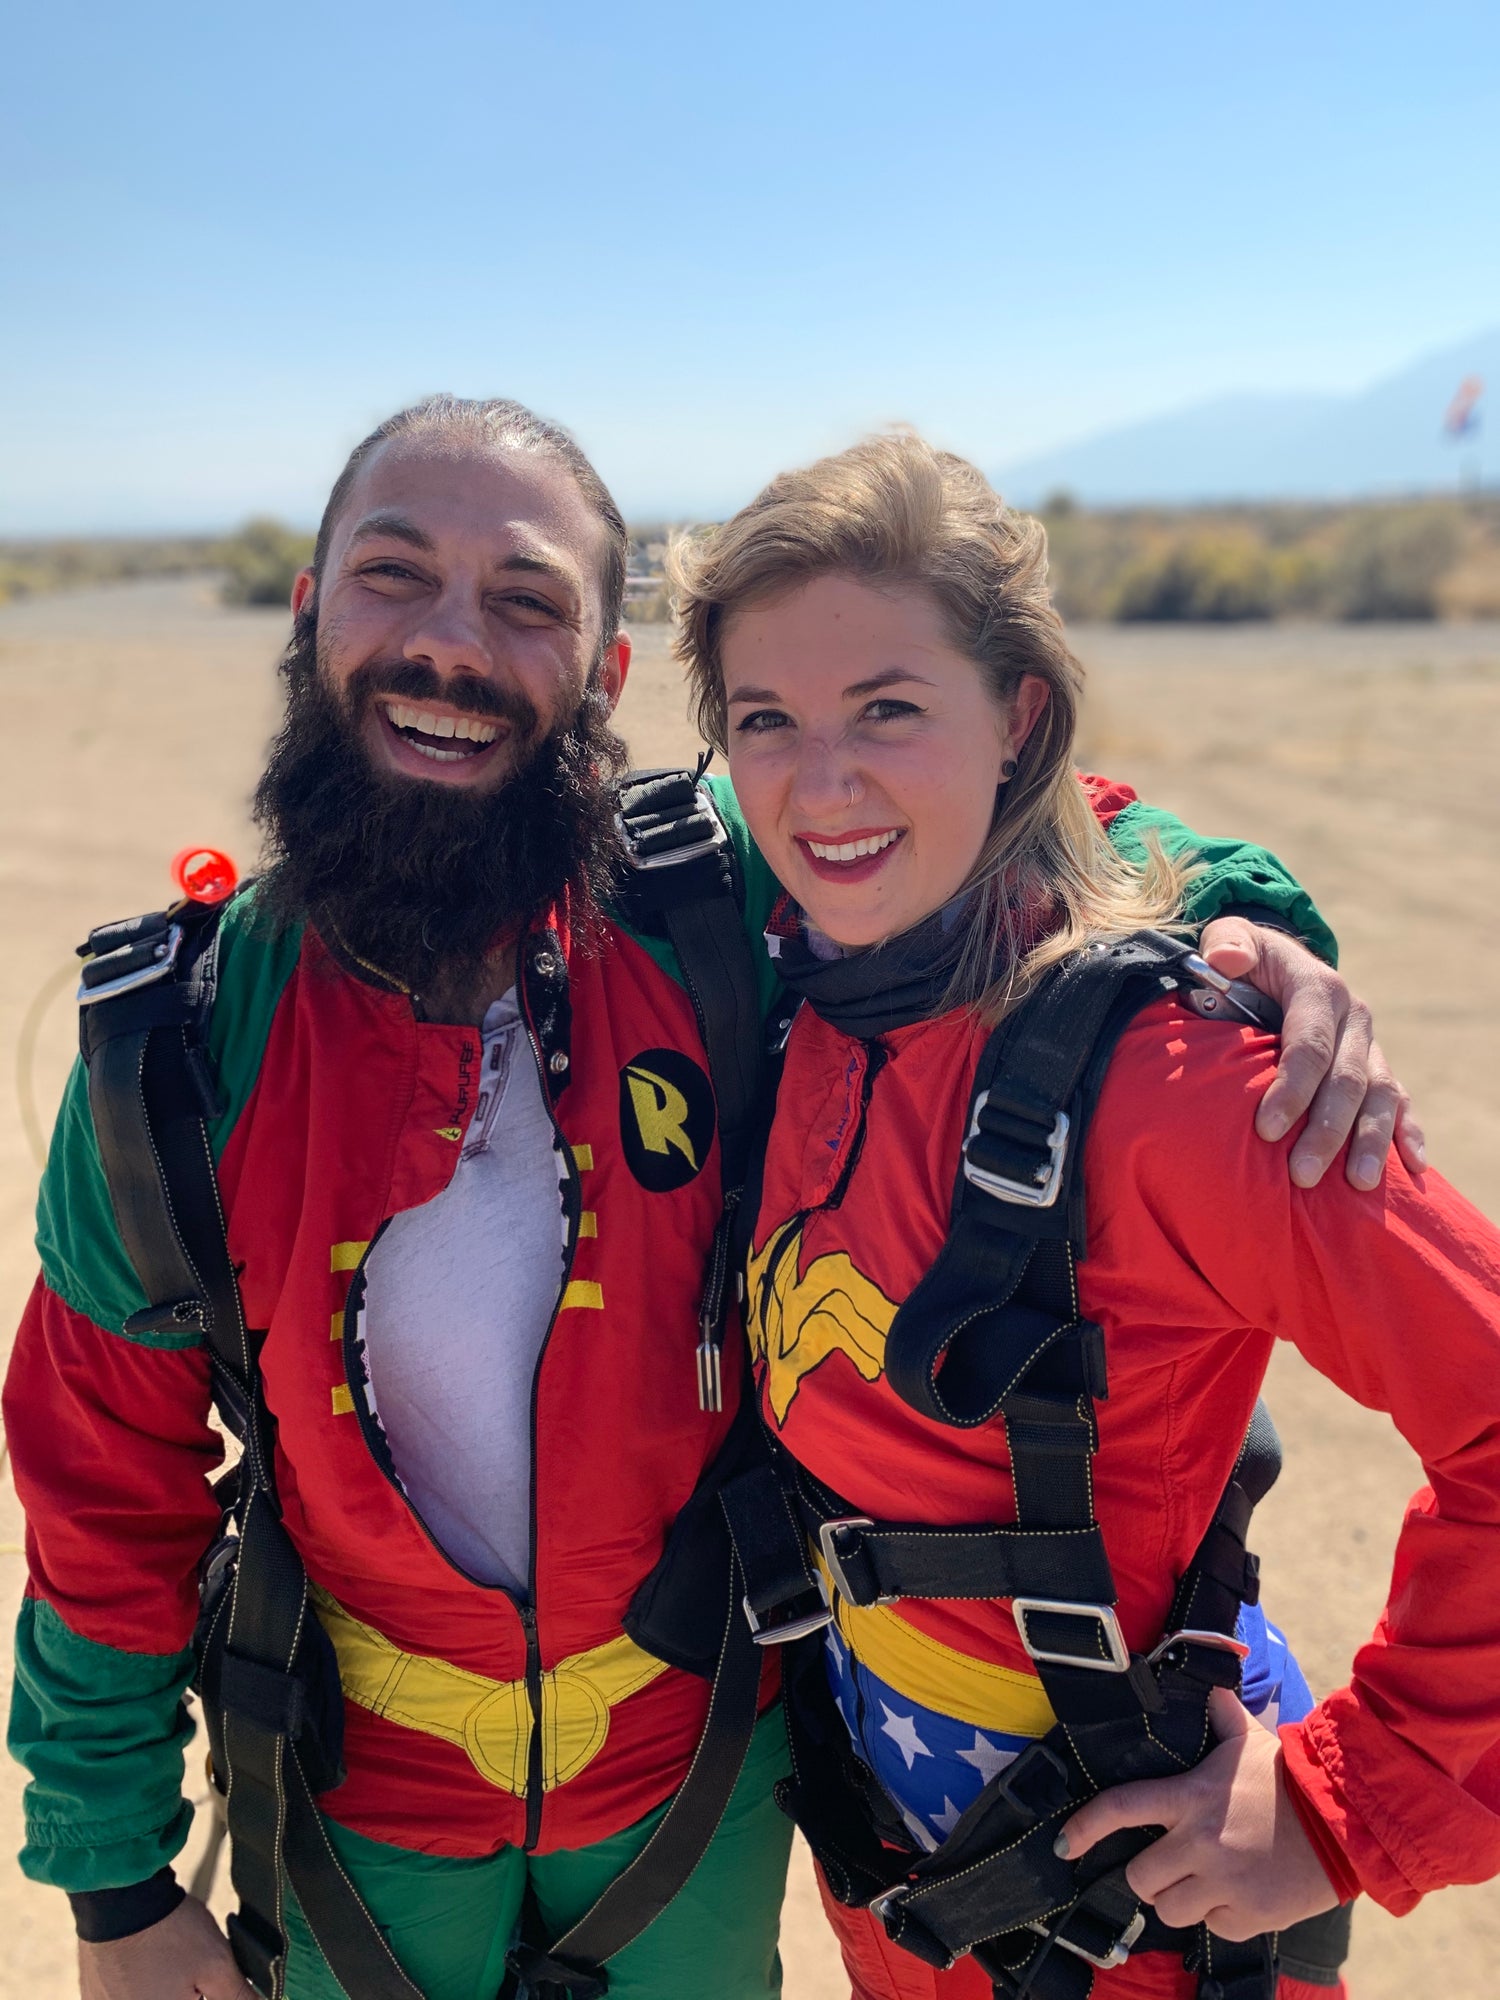 Two founders of Legends Kratom Company living legendary and adventurous lives by skydiving and pursuing dreams like creating a kratom company of high quality kratom products